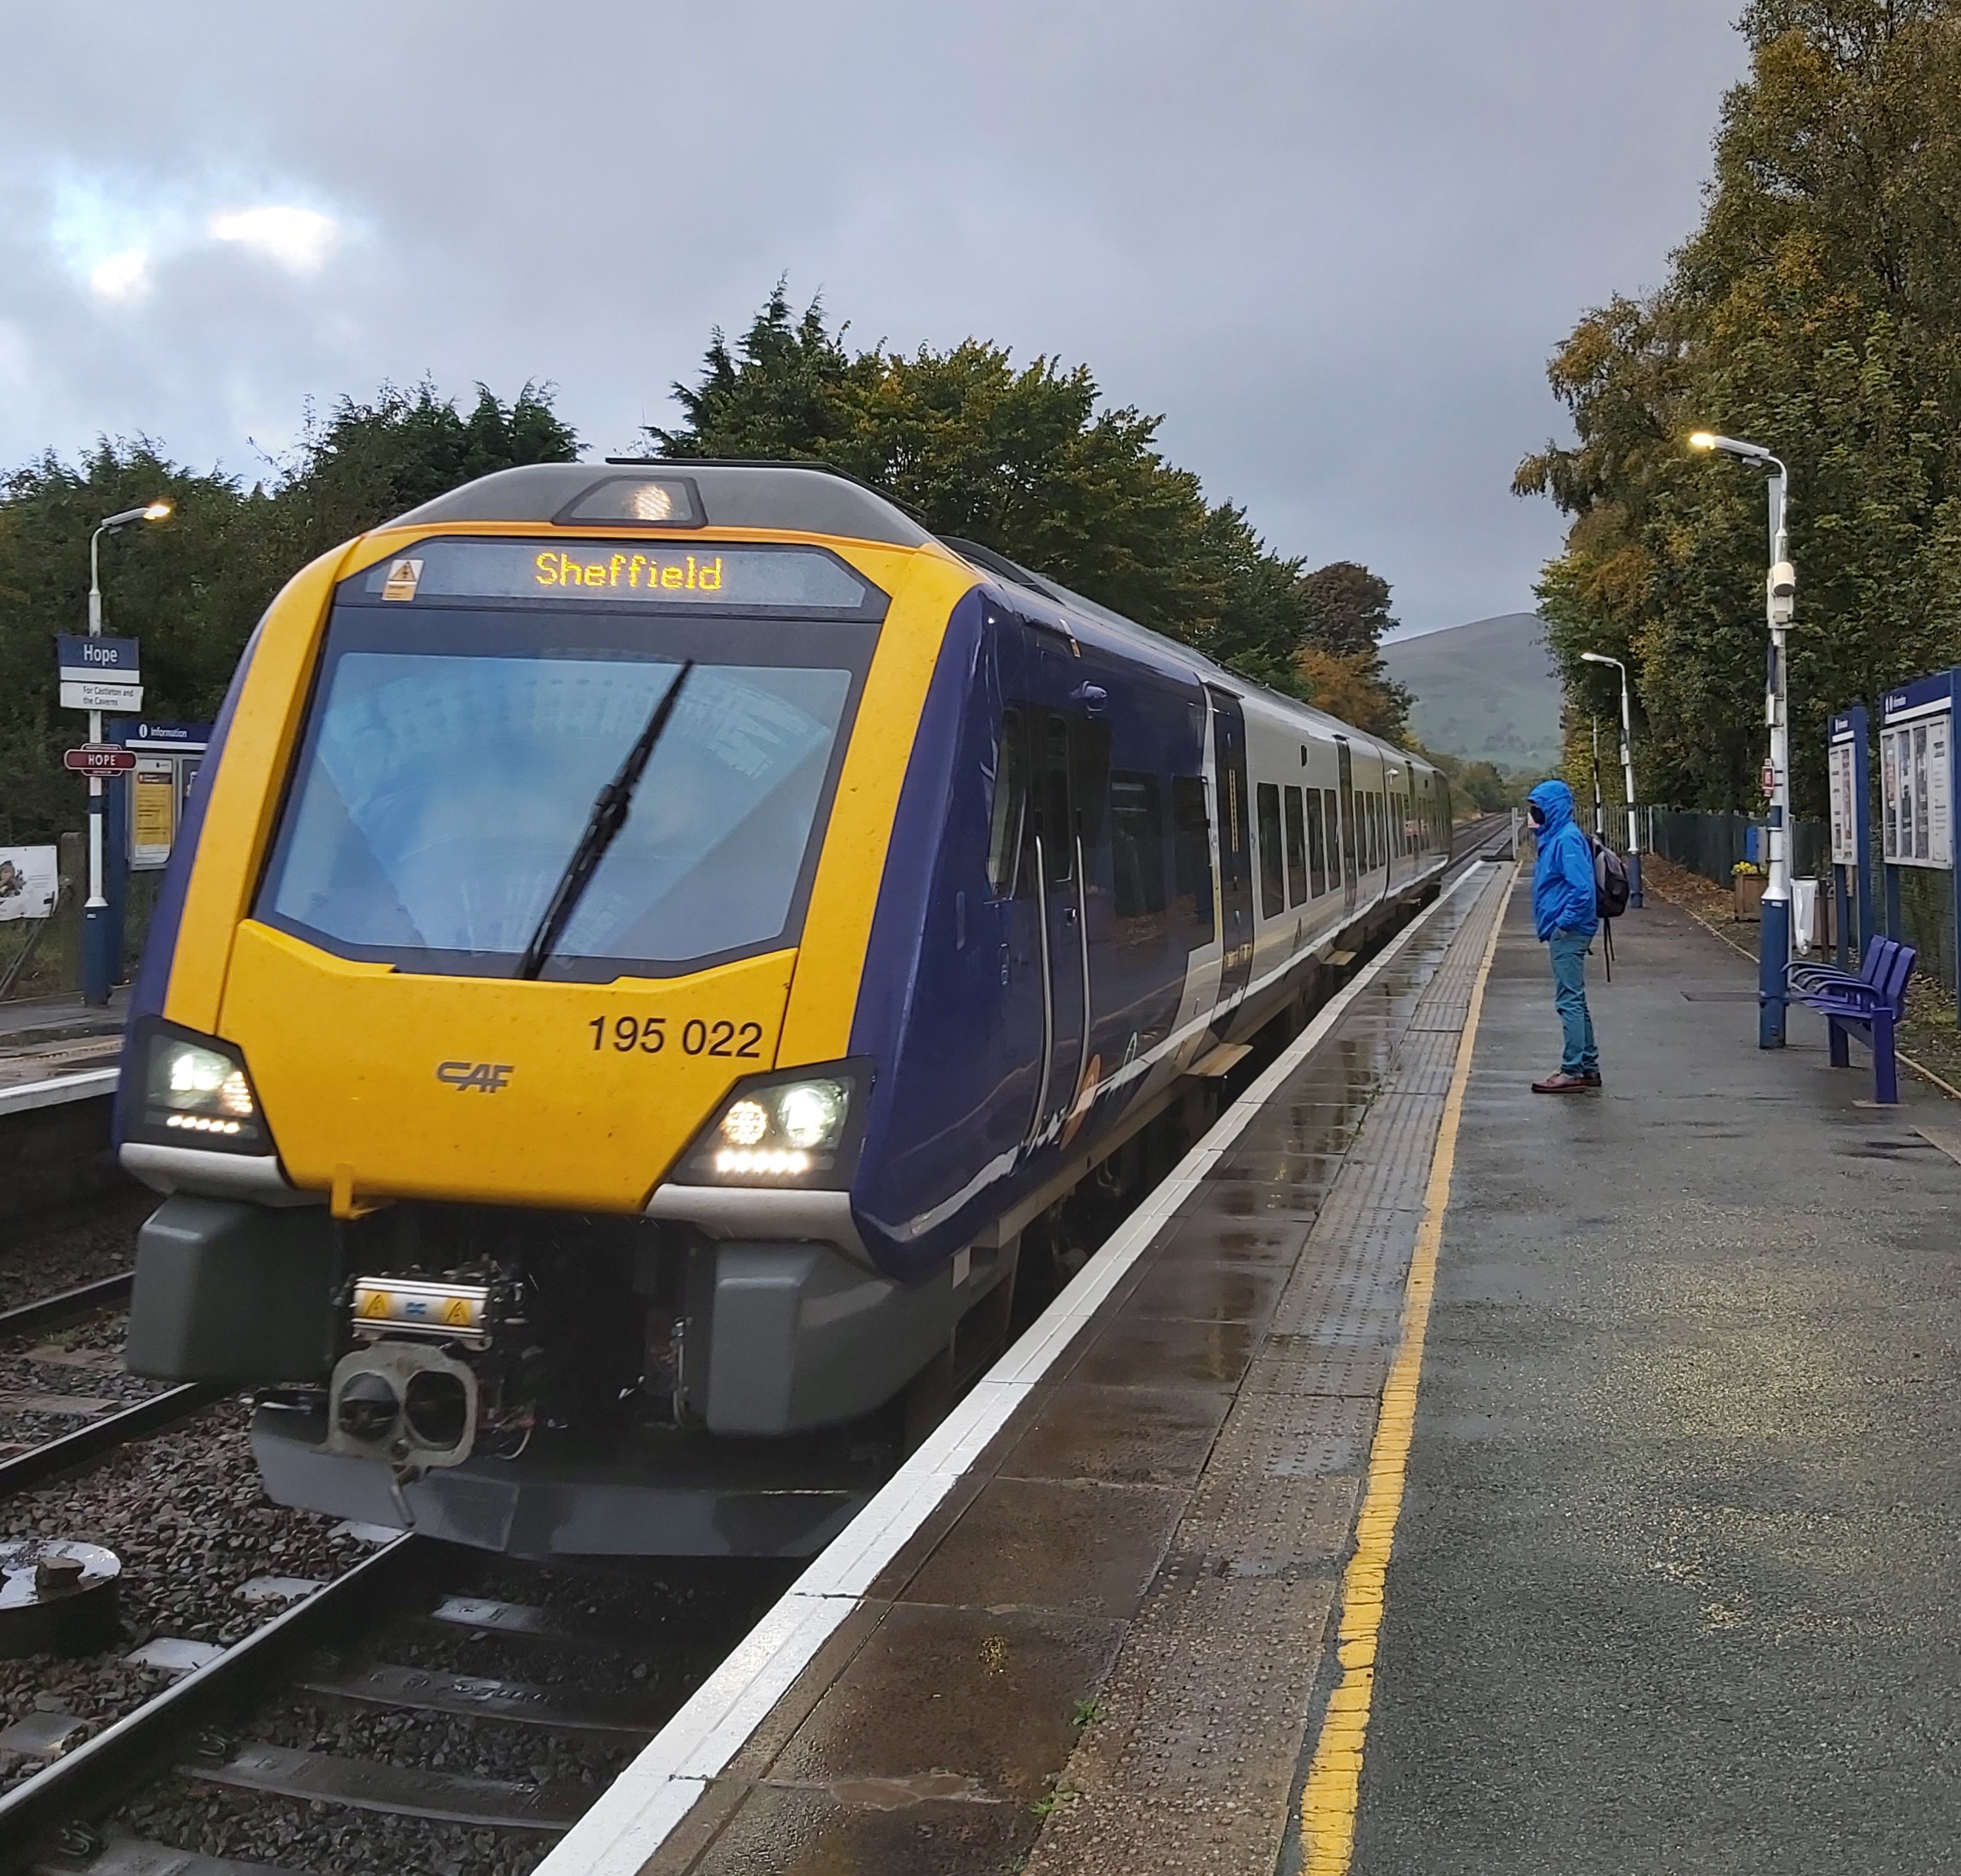 A train station platform with a train to Sheffield pulled in and a person about to board